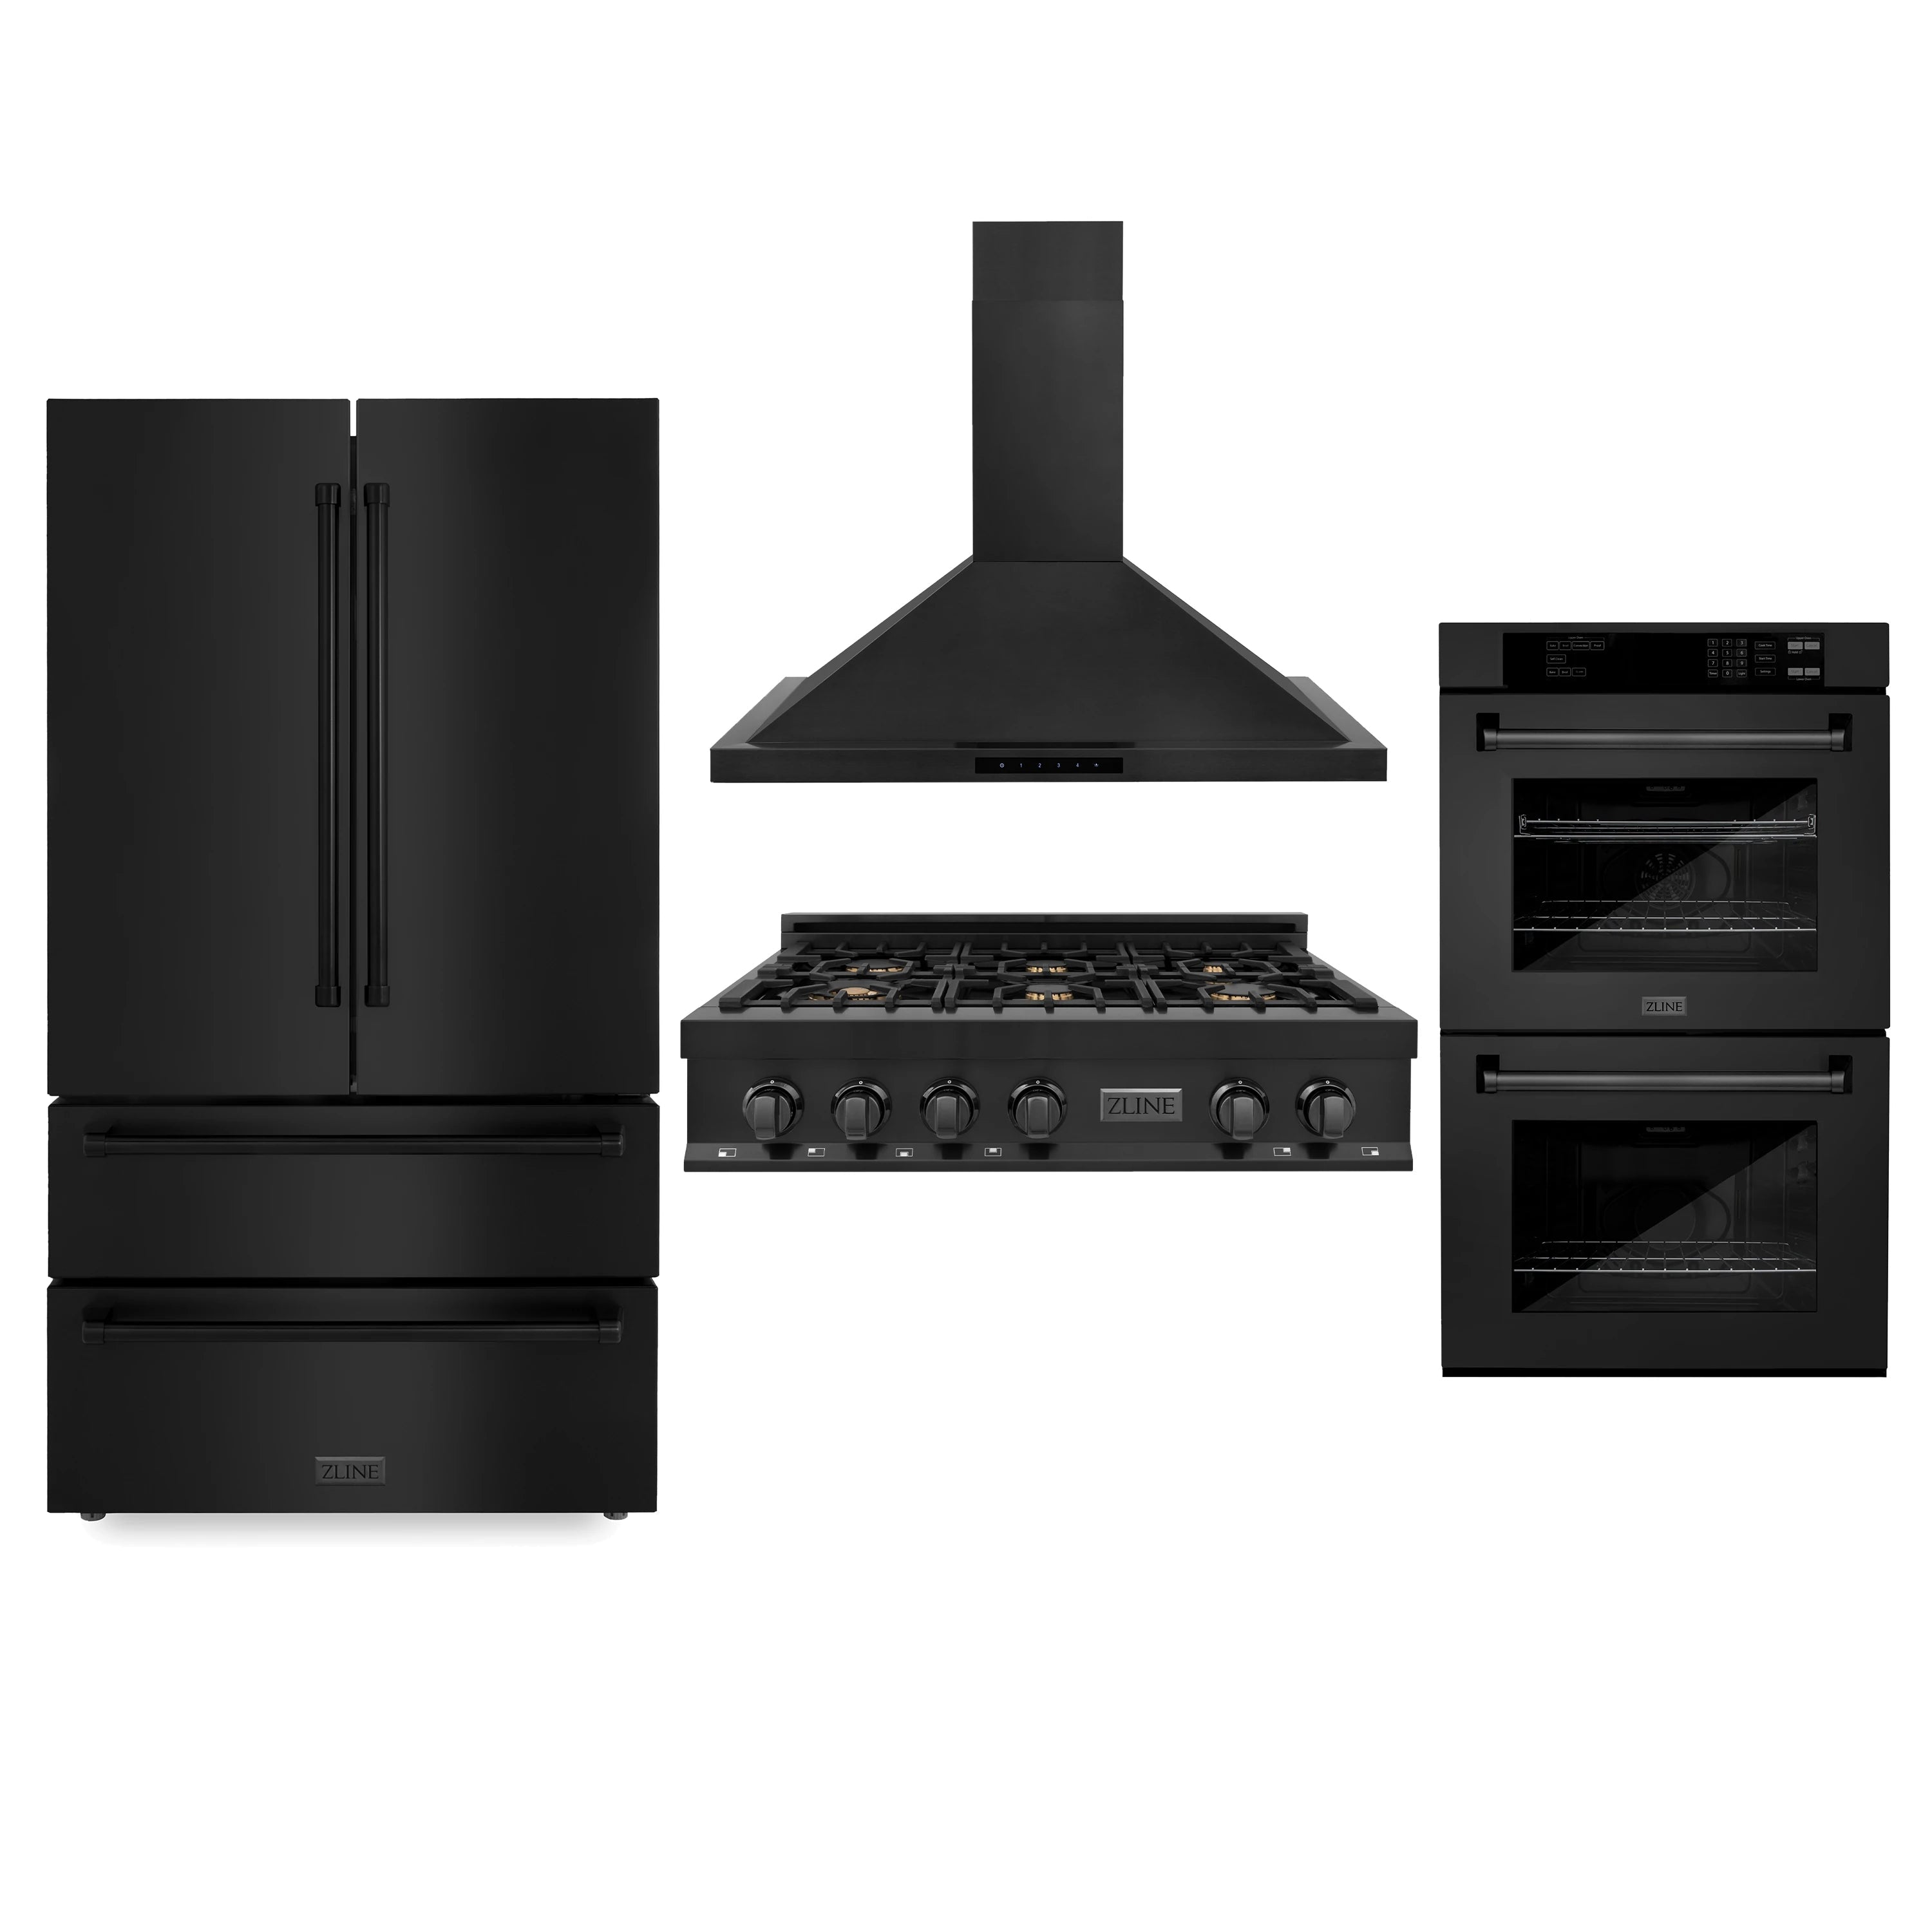 ZLINE 4-Piece Appliance Package - 36-Inch Rangetop with Brass Burners, Refrigerator, 30-Inch Electric Double Wall Oven, and Convertible Wall Mount Hood in Black Stainless Steel (4KPR-RTBRH36-AWD)